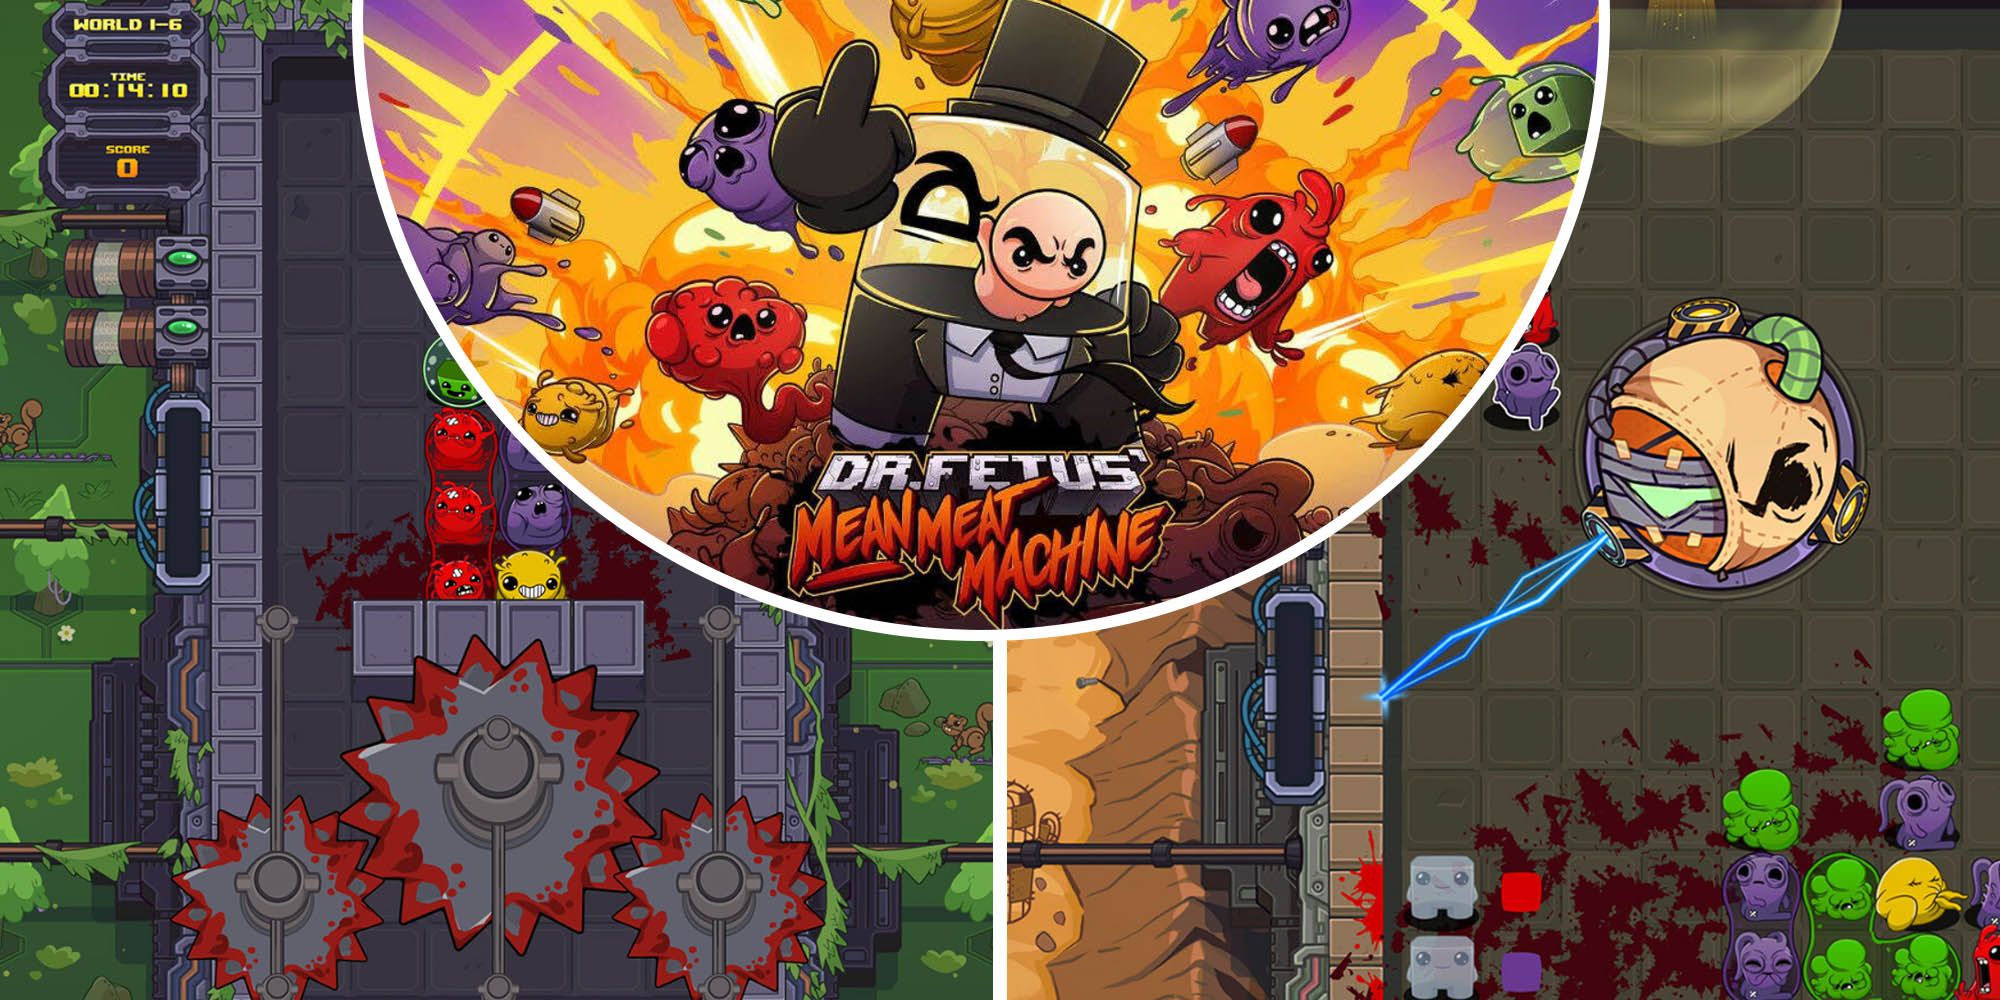 Super Meat Boy spinoff Dr Fetus Mean Meat Machine puzzle stages